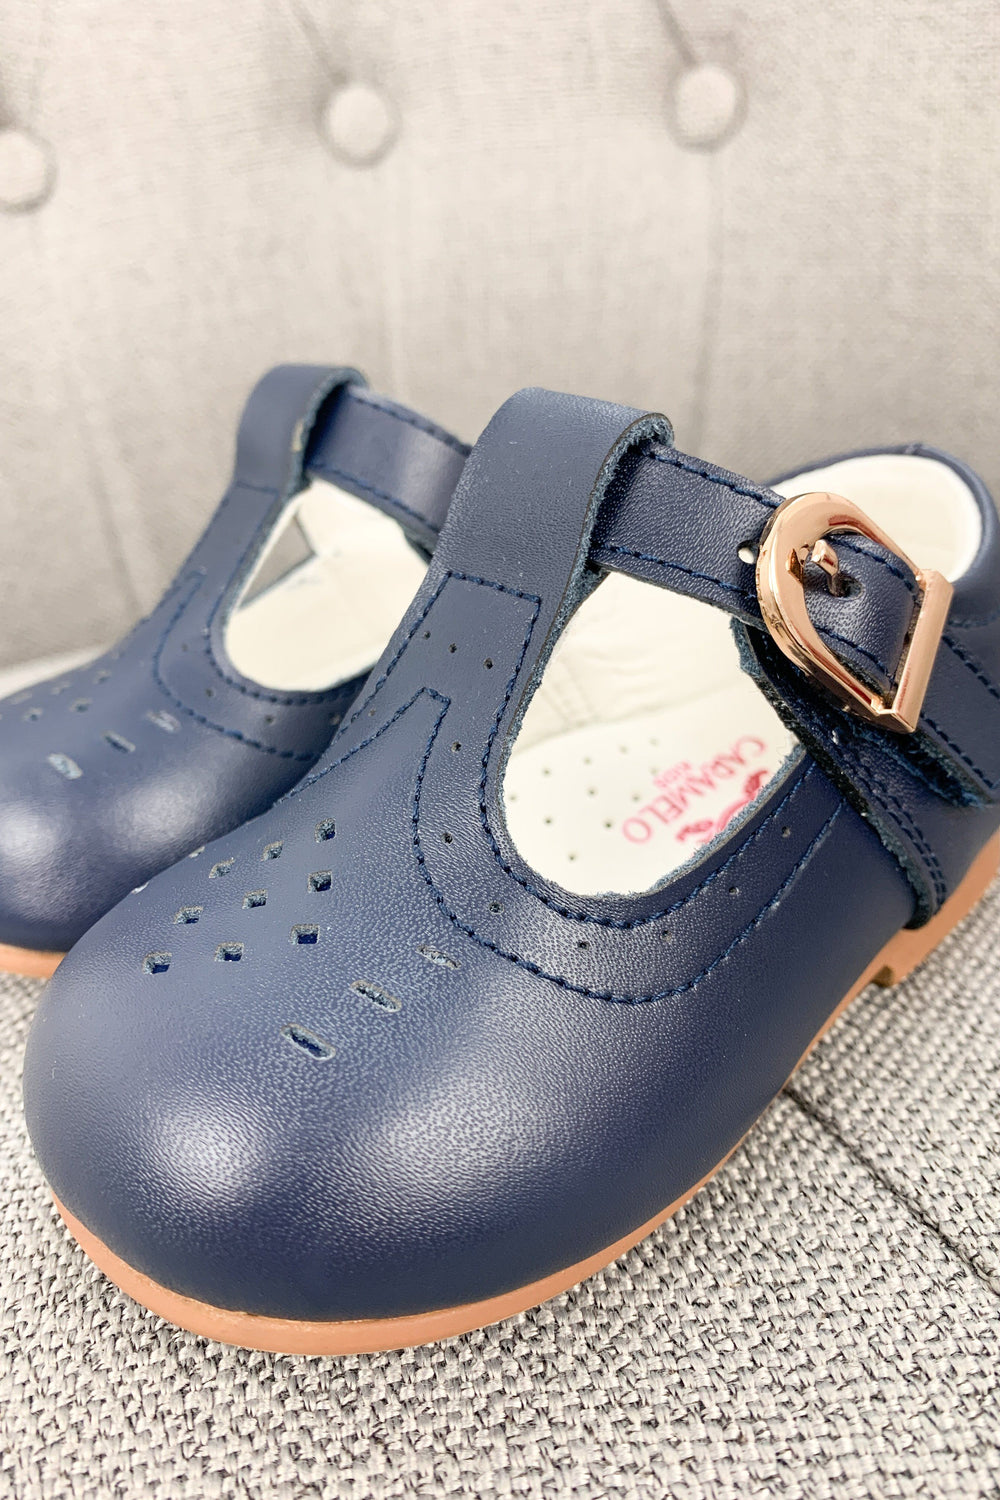 Caramelo Kids "Lucas" Leather T-Bar Shoes | Millie and John